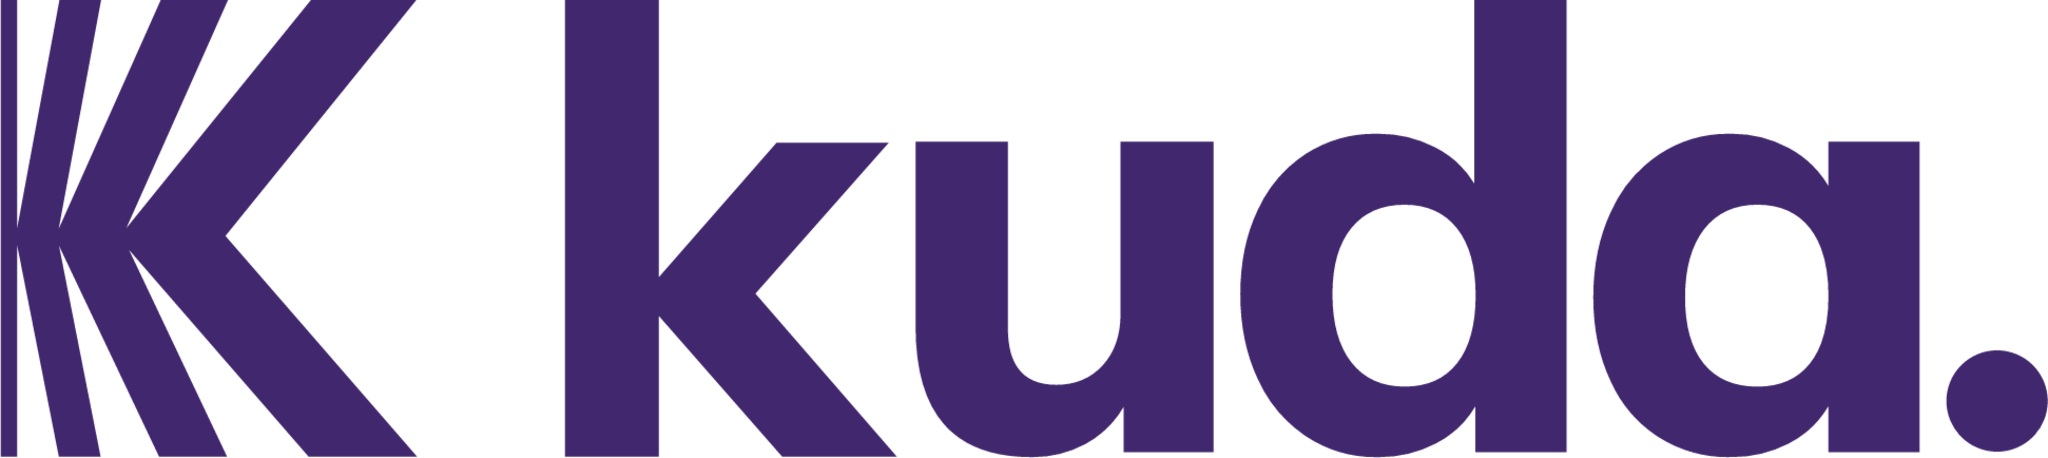 Kuda, the money app for Africans, to launch in Canada